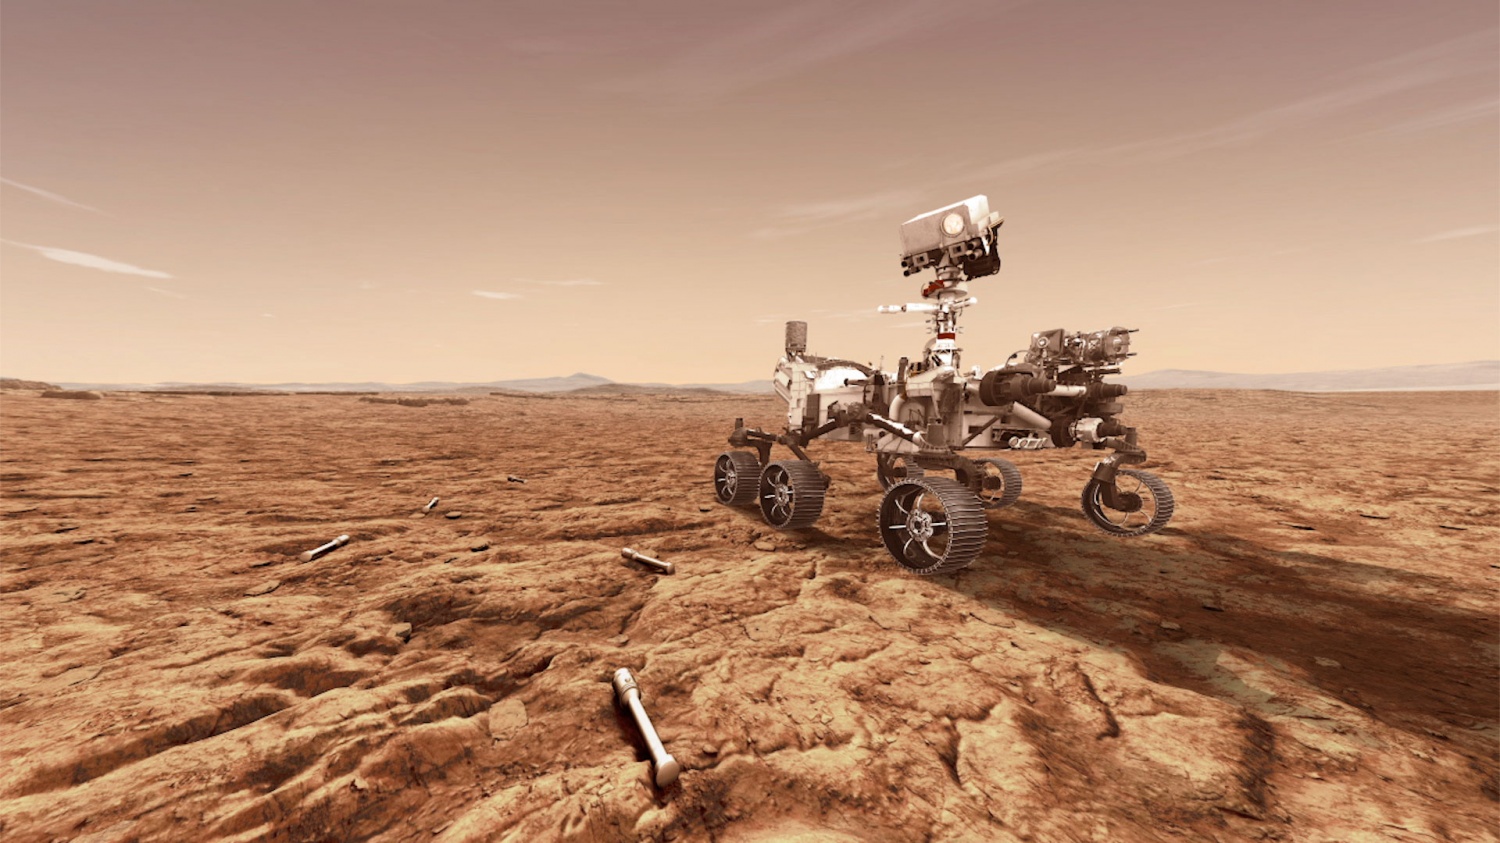 New Research Casts Doubt on Rover's Ability to Find Life on Mars